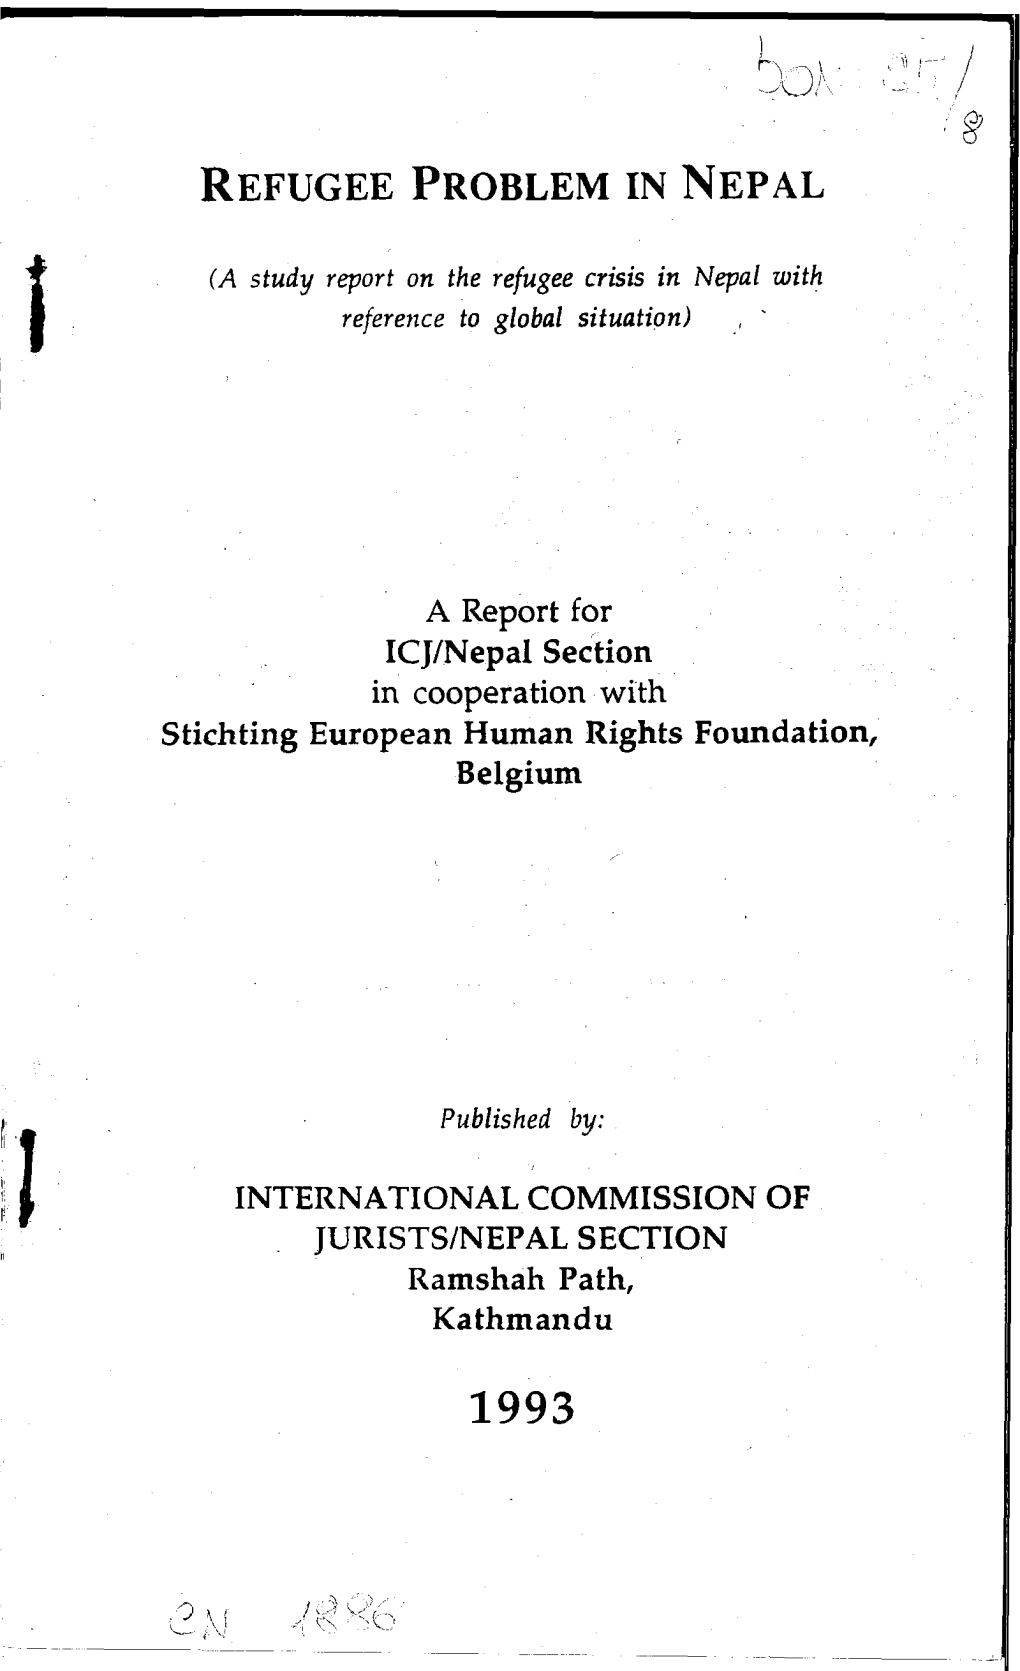 A Report for ICJ/Nepal Section in Cooperation with Stichting European Human Rights Foundation, Belgium INTERNATIONAL COMMISSION